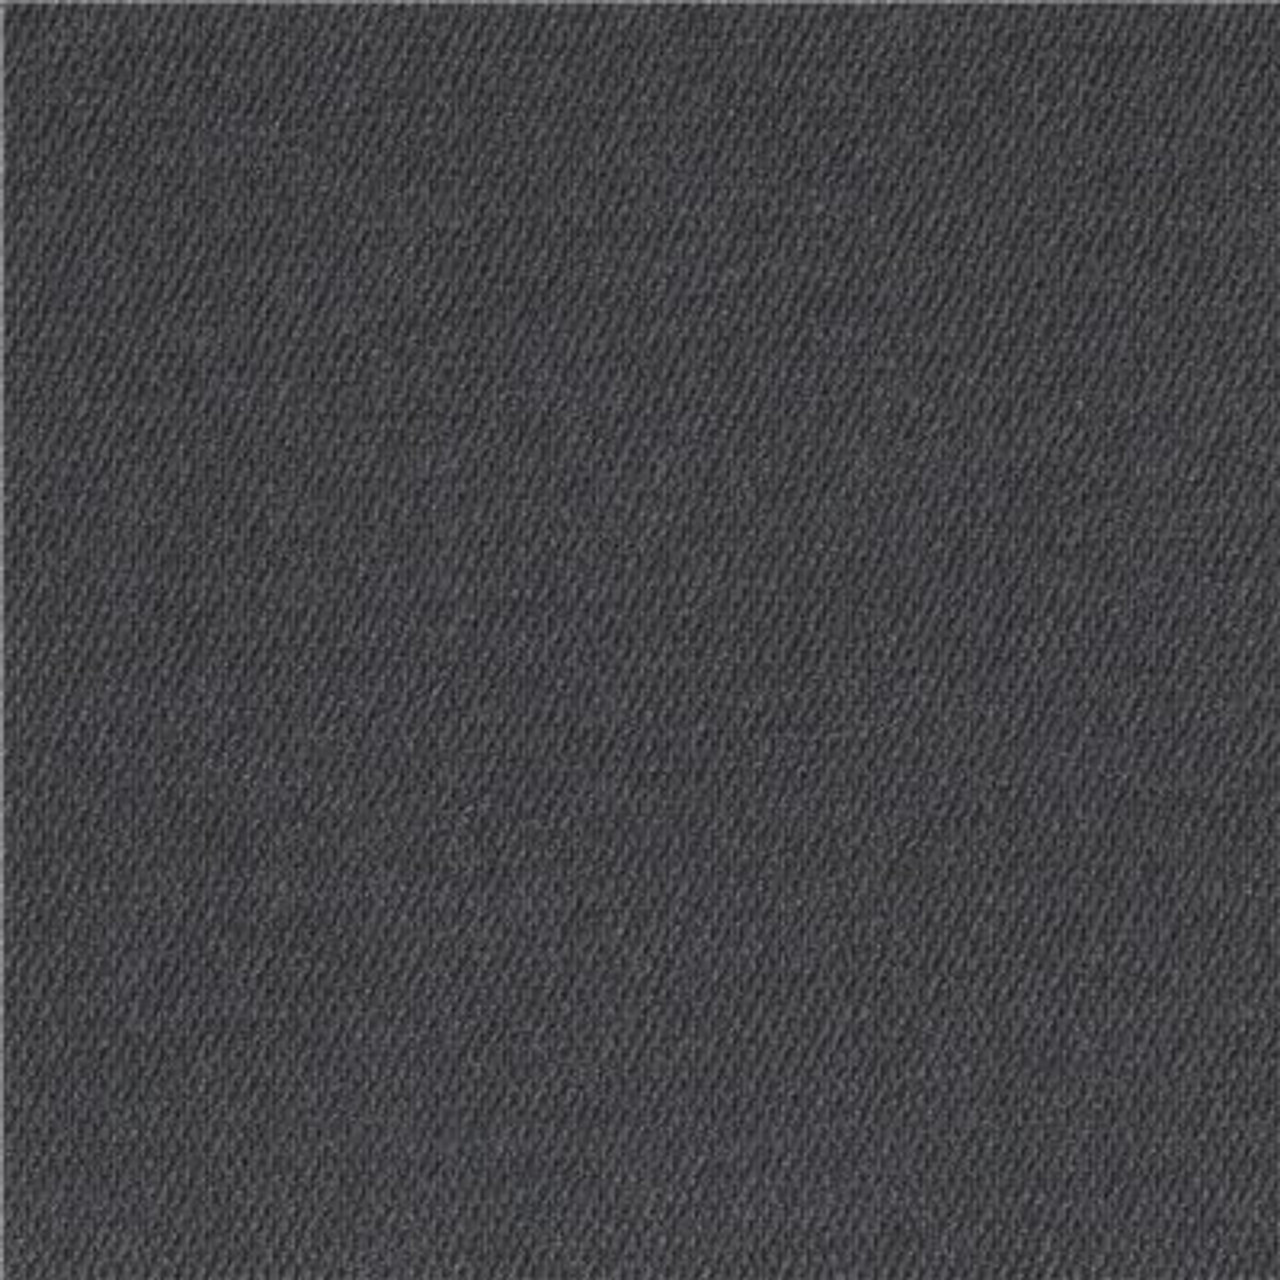 Foss Peel And Stick First Impressions Ocean Blue Hobnail Texture 24 In. X 24 In. Commercial Carpet Tile (15 Tiles/Case)